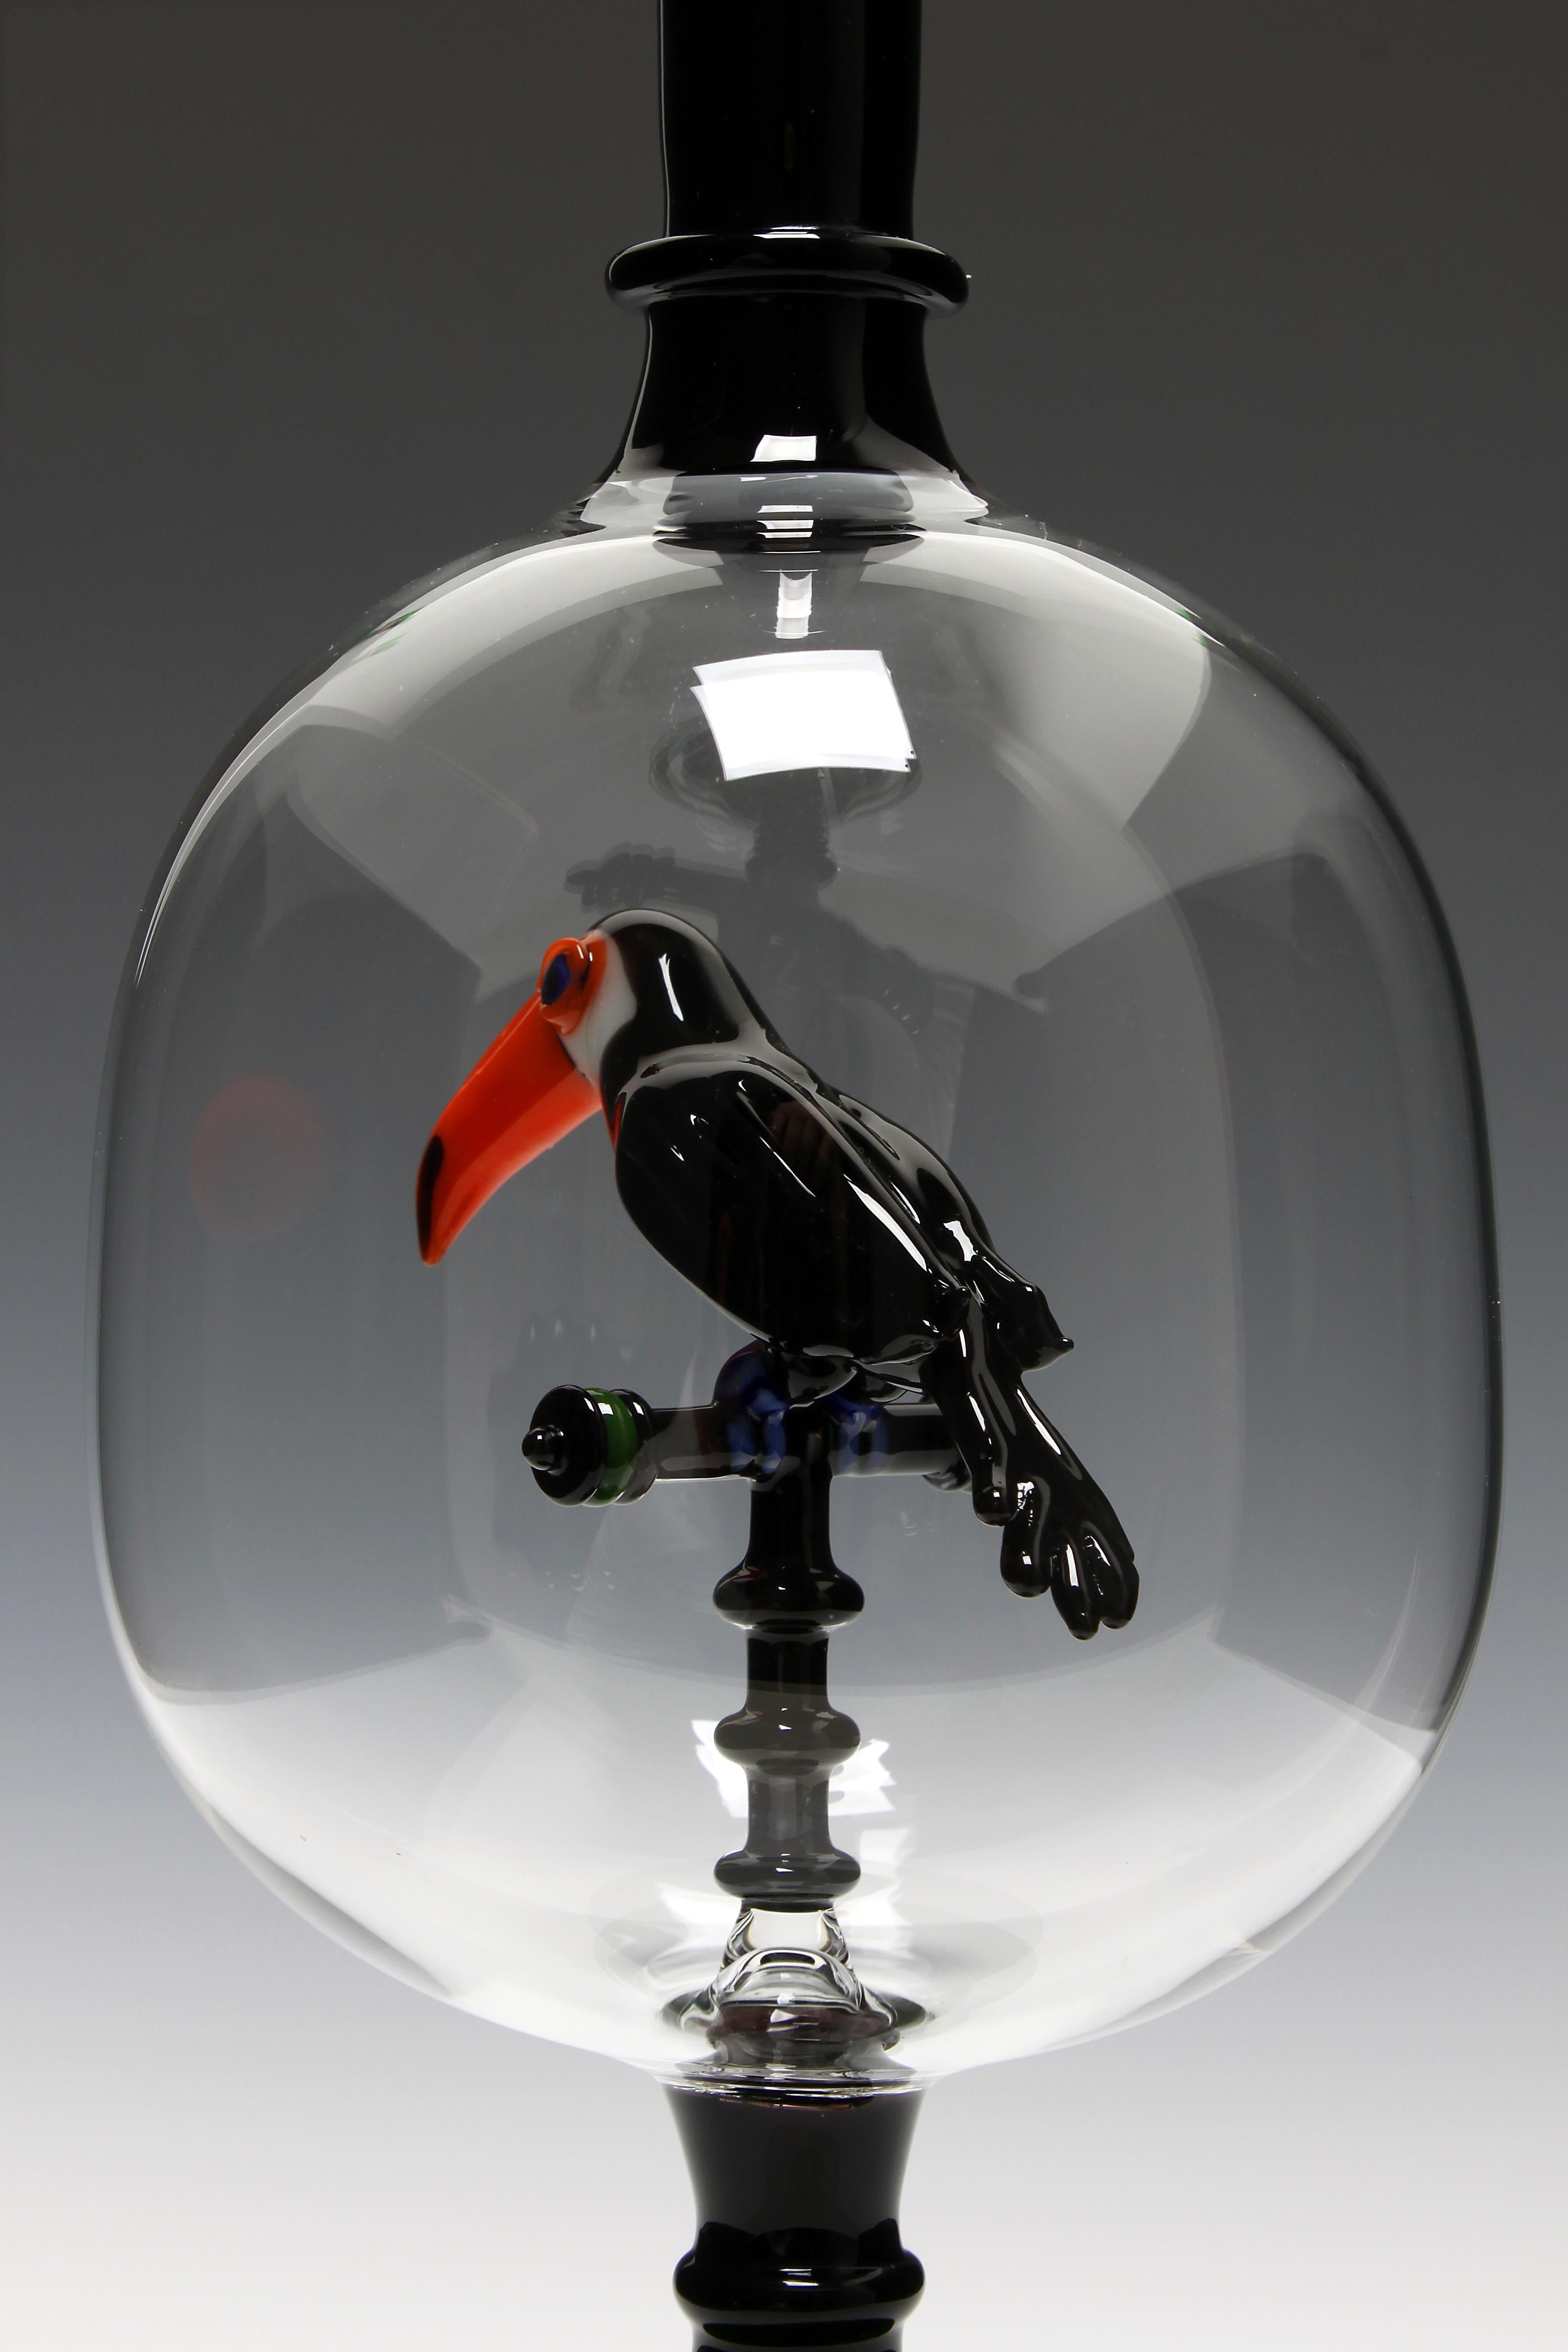 Toucan Bottle - Sculpture by Kiva Ford